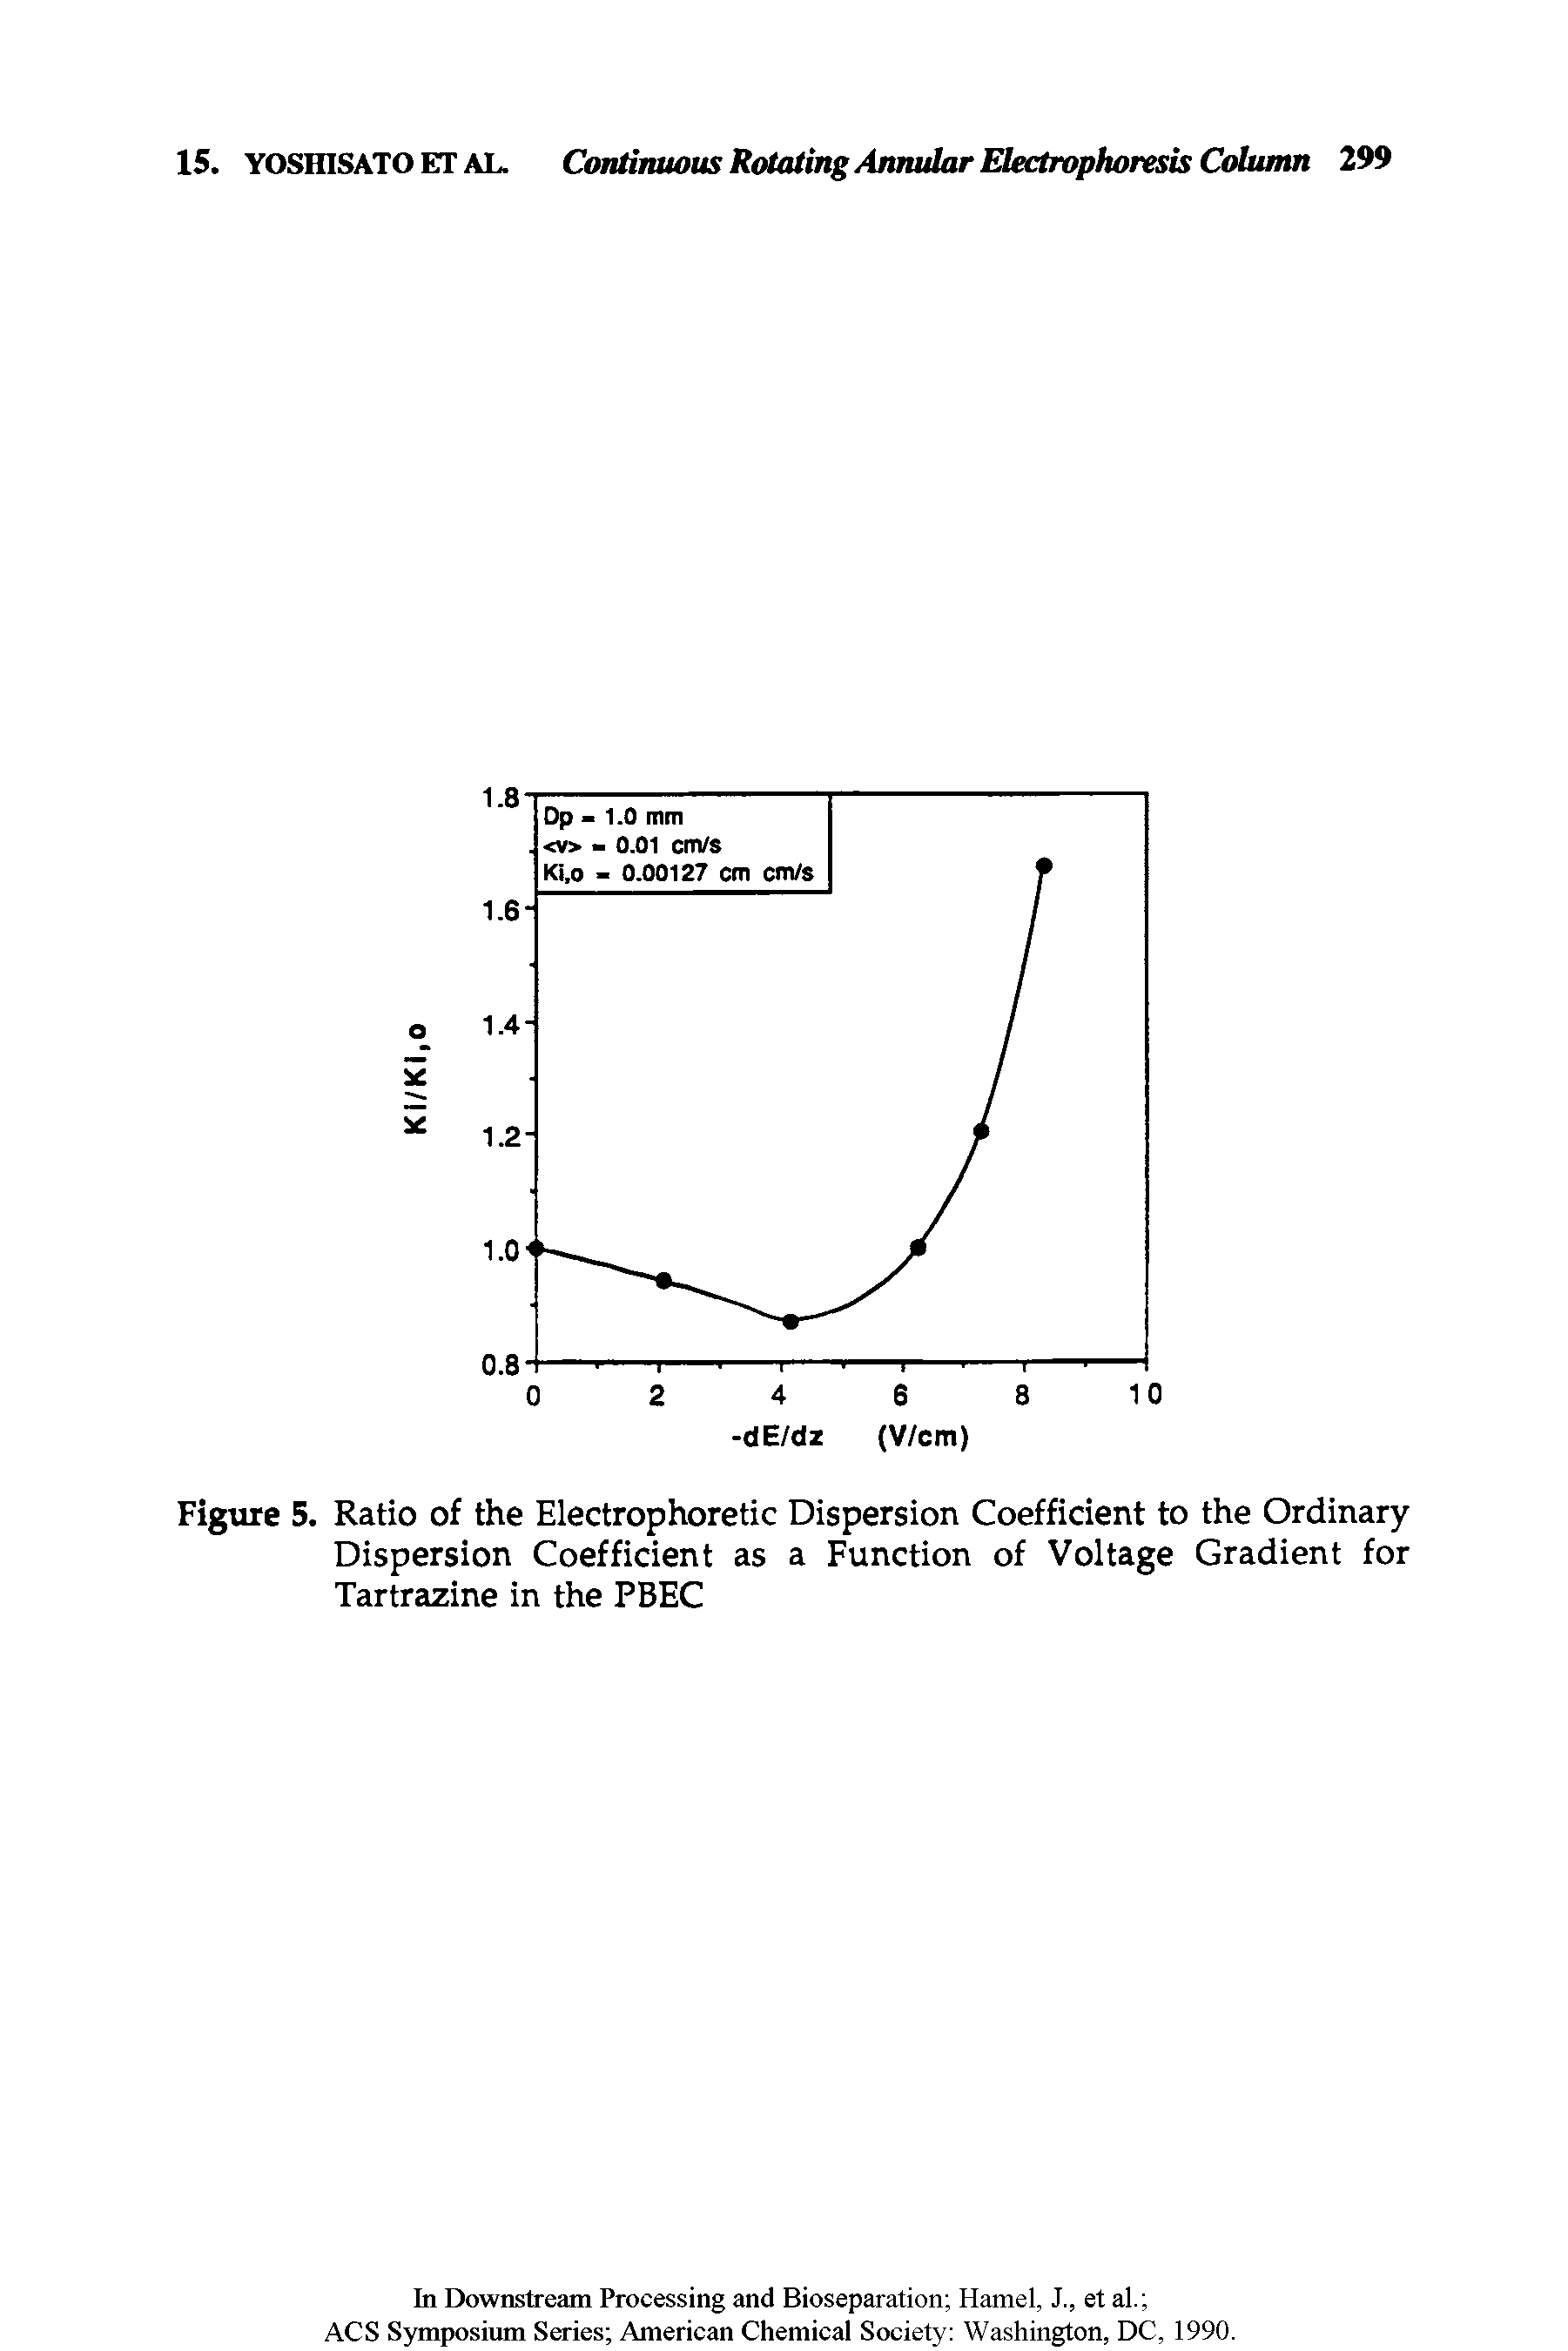 Figure 5. Ratio of the Electrophoretic Dispersion Coefficient to the Ordinary Dispersion Coefficient as a Function of Voltage Gradient for Tartrazine in the PBEC...